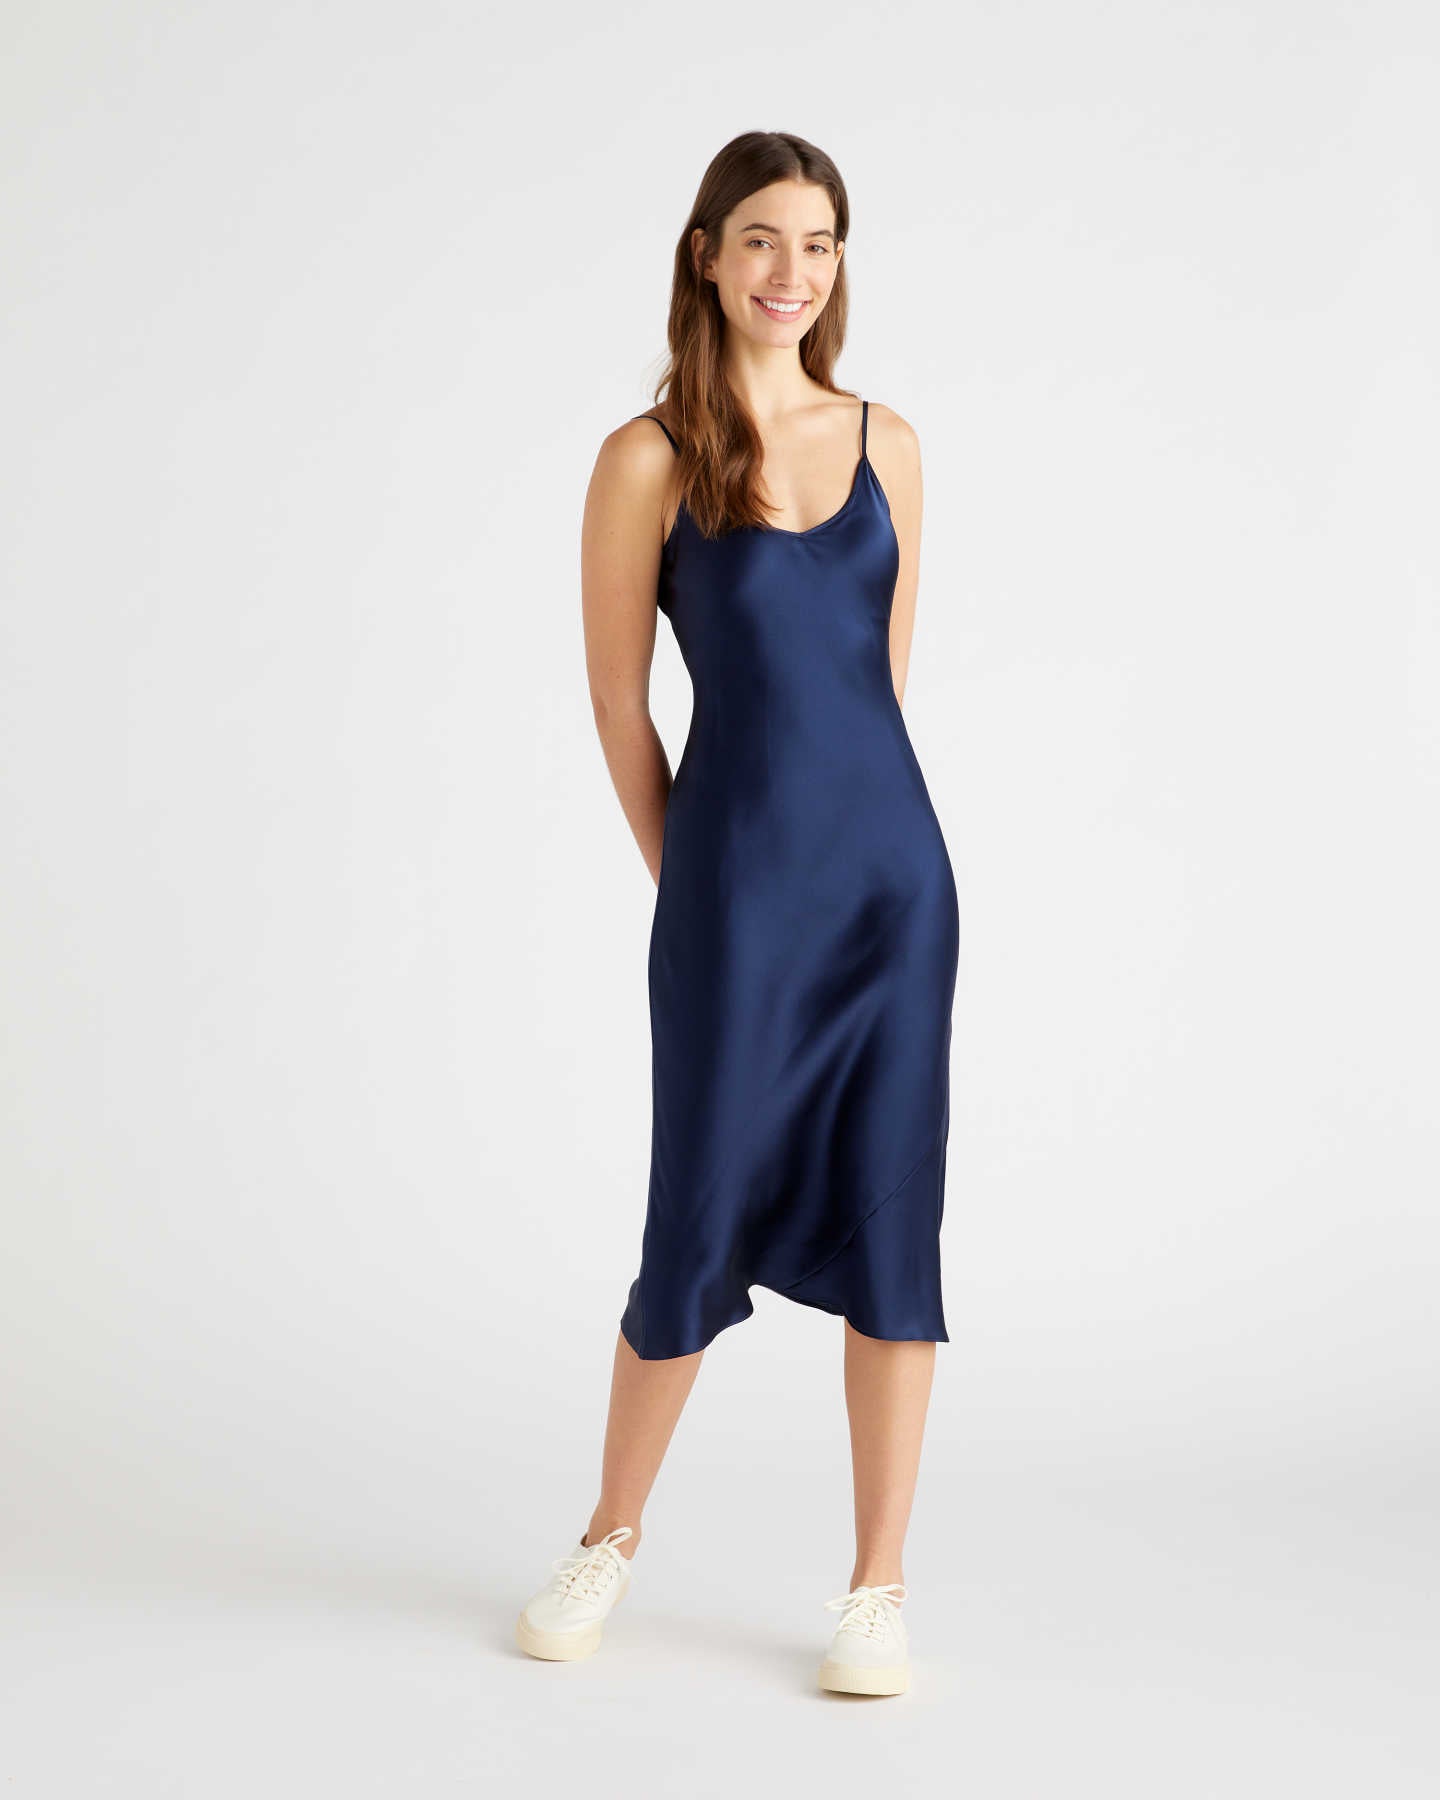 An Honest Review of the Washable Silk Slip Dress from Quince